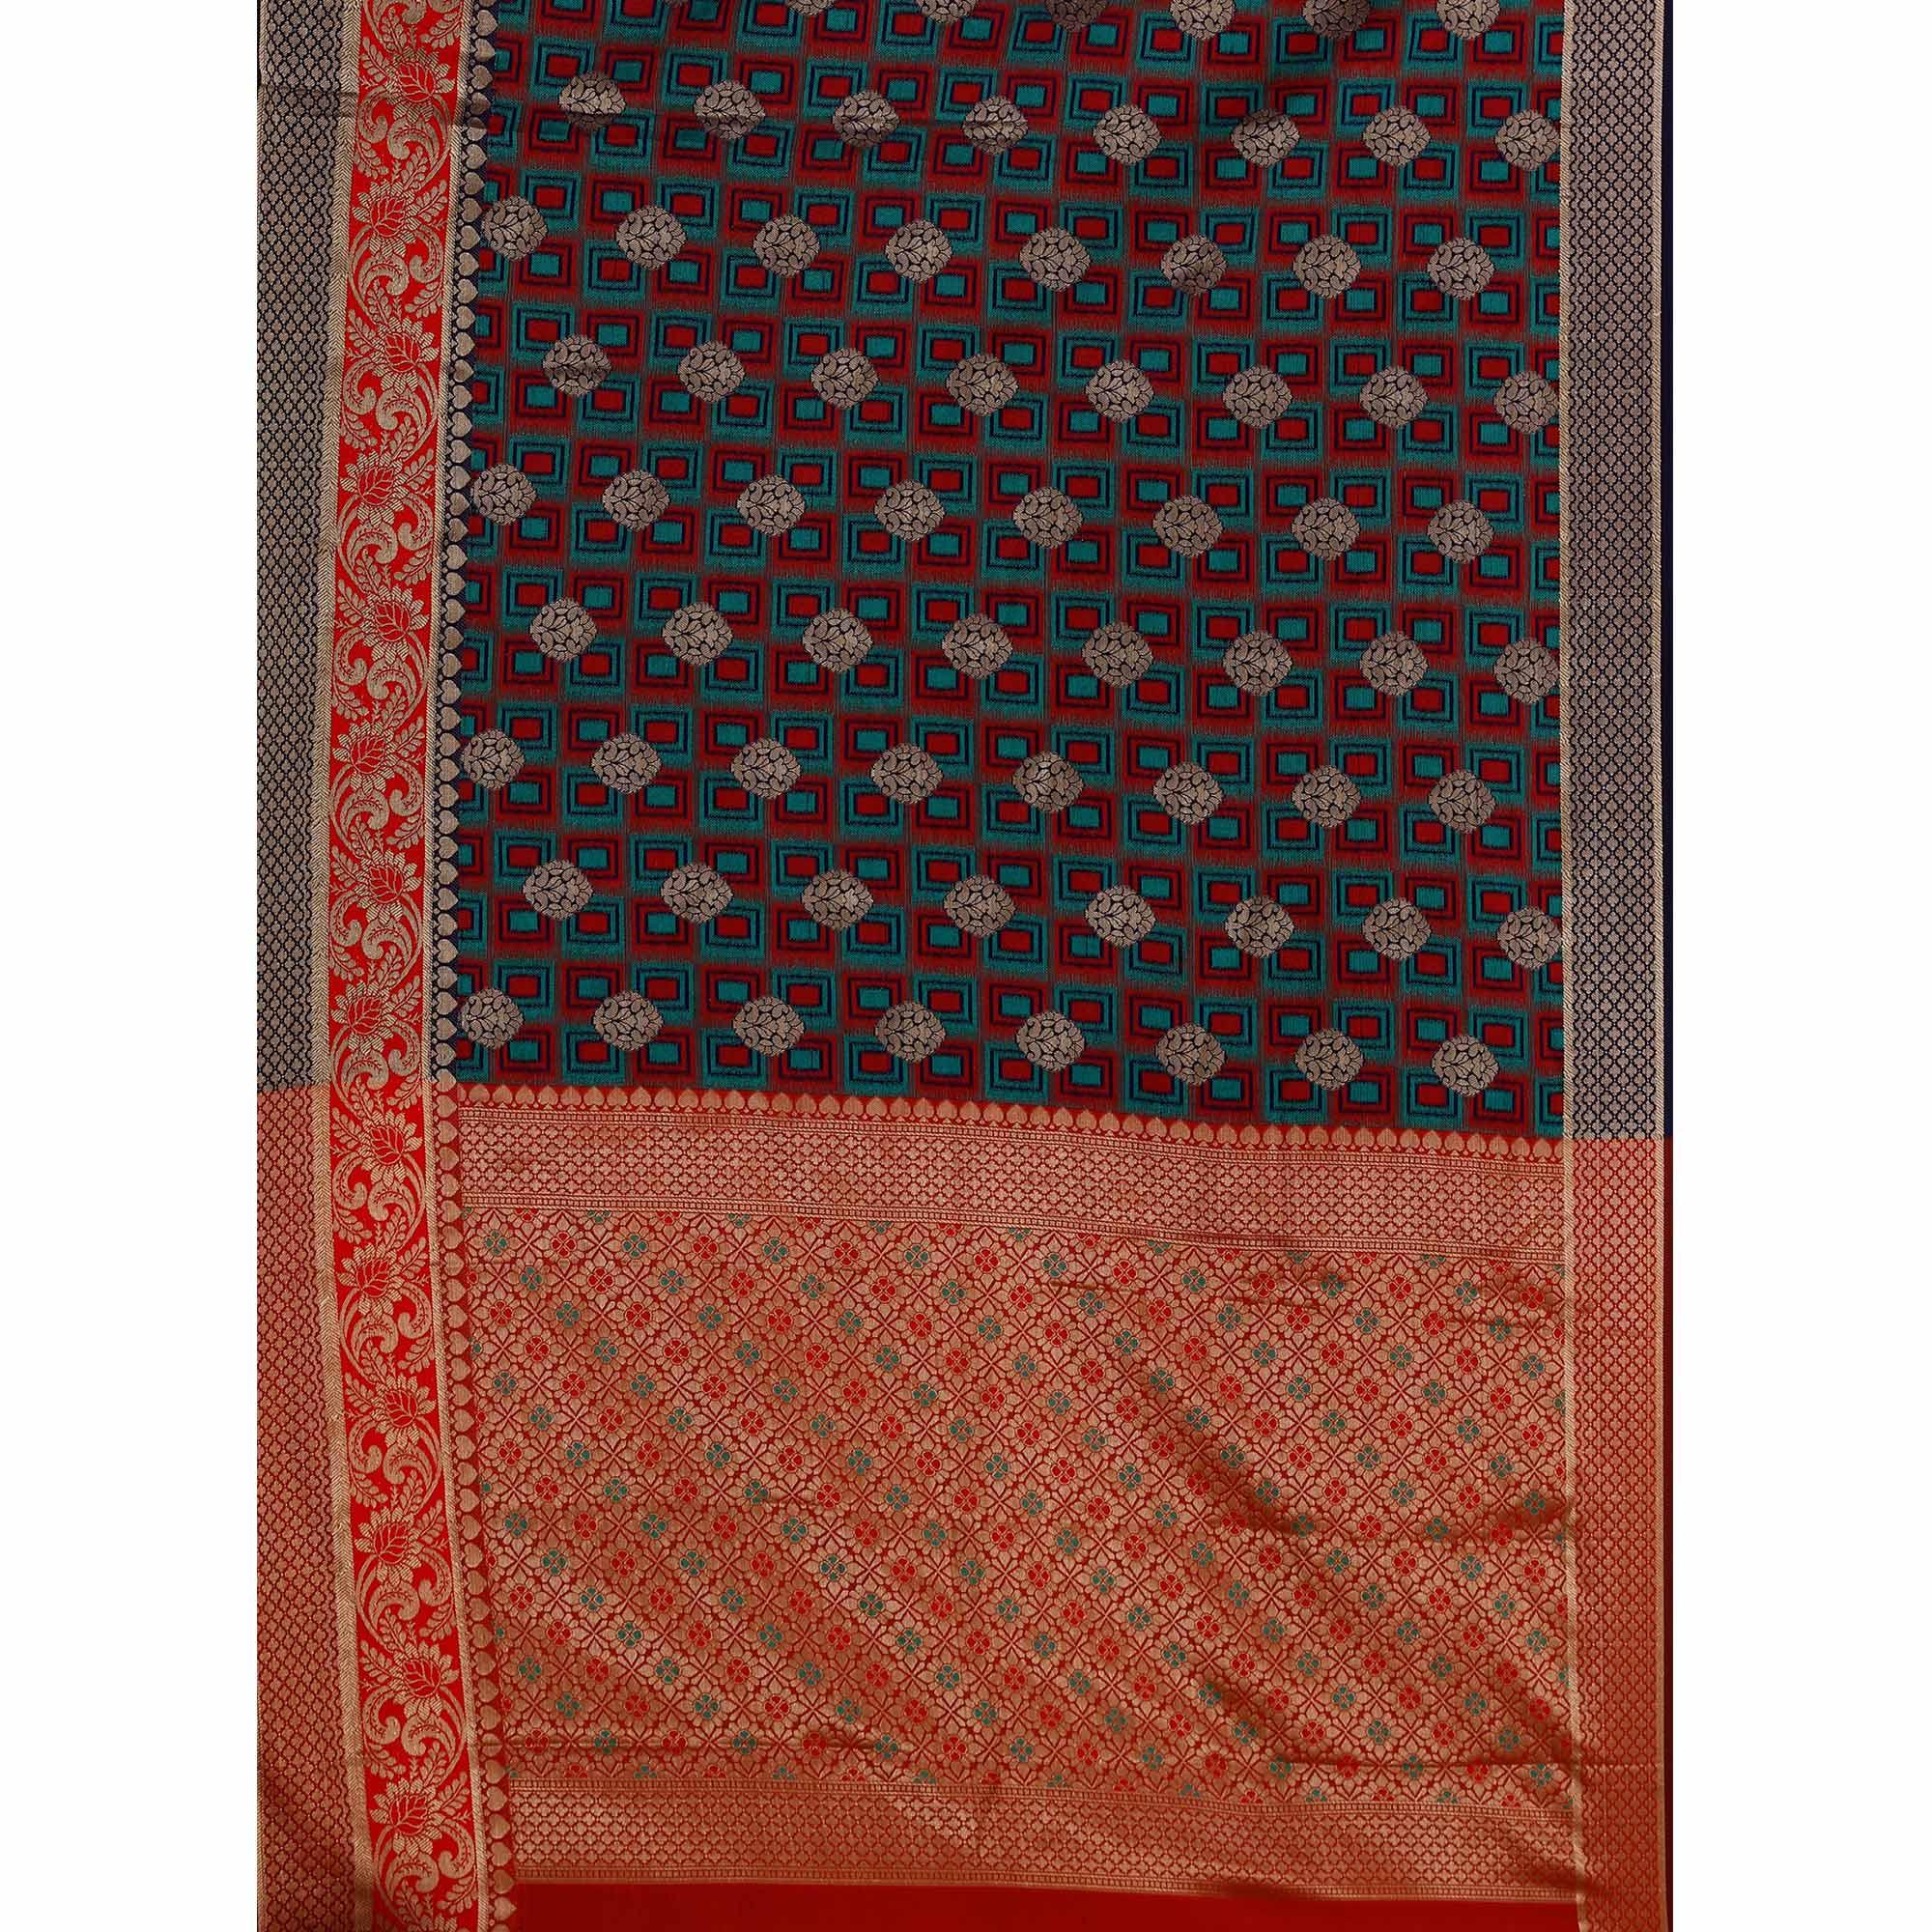 Glowing Navy Blue-Red Colored Festive Wear Woven Cotton Silk Jacquard Saree - Peachmode